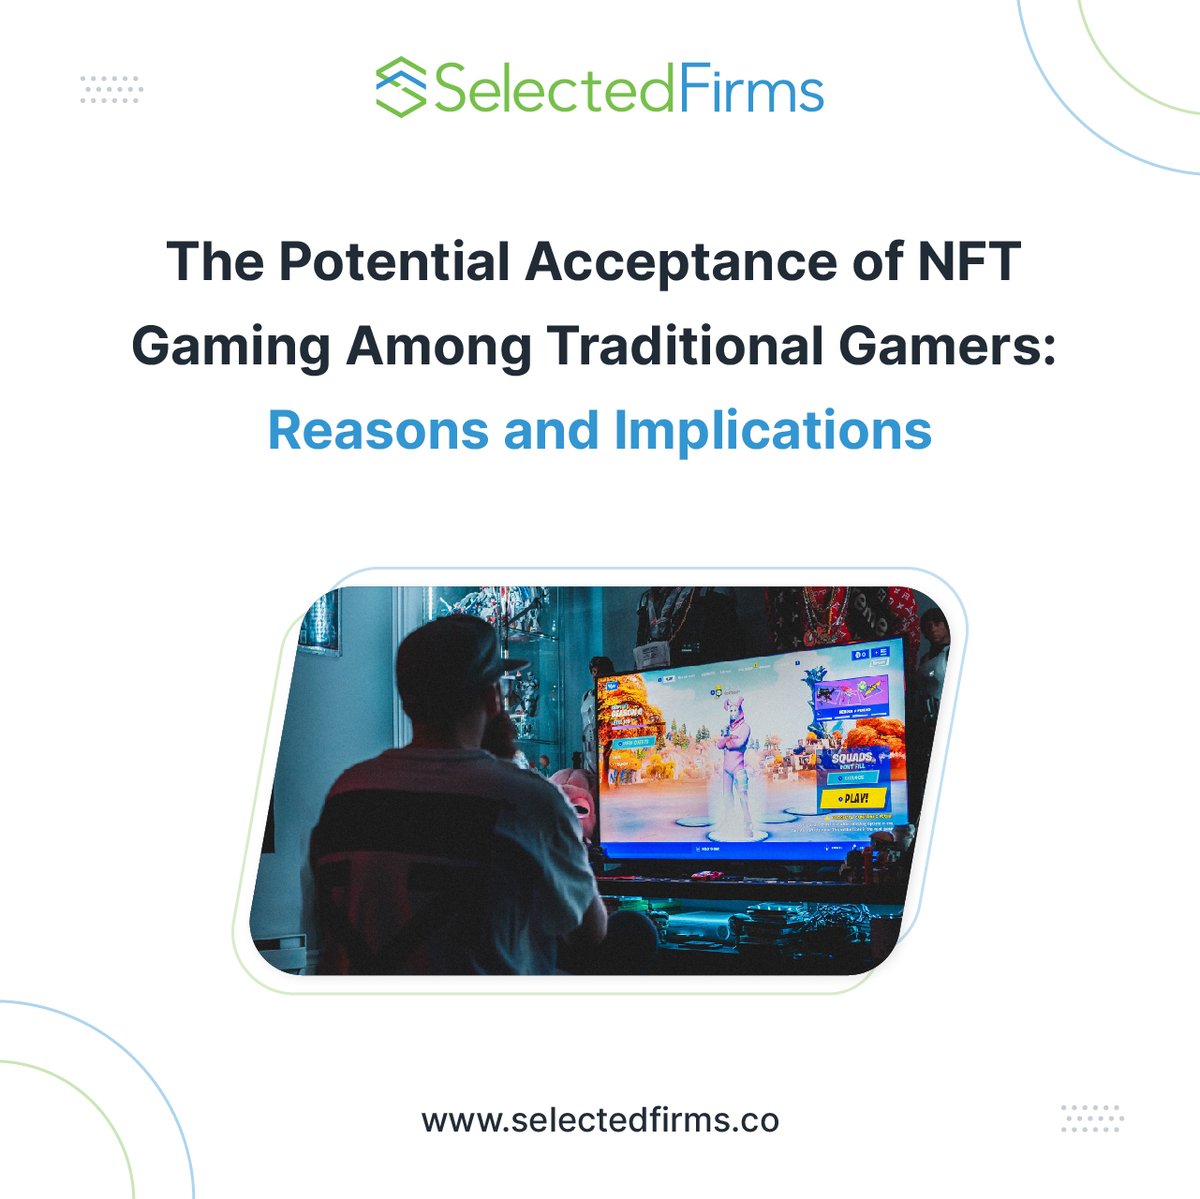 Check out 👉  
The Potential Acceptance of NFT Gaming Among Traditional Gamers: Reasons and Implications: j1l.in/NwSWfO
#selectedfirms #gaming #gamingindustry #nft #nfts #gamingcommunity #nftgames